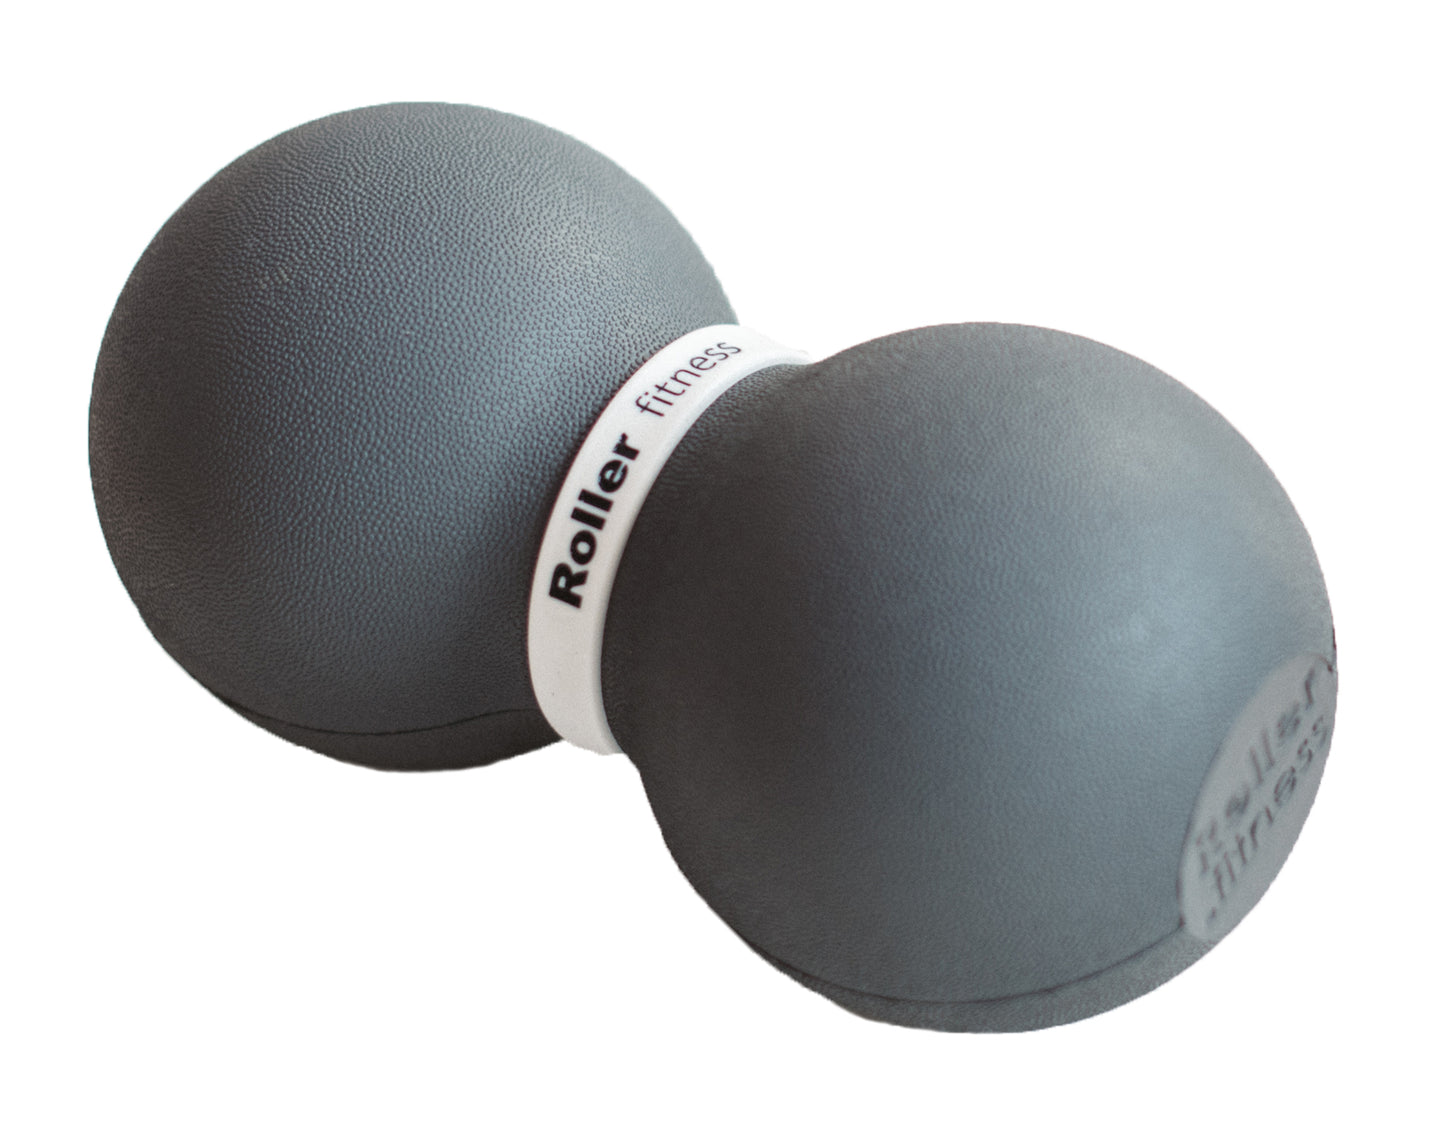 Infinity Roller, Our Compact Foam Roller & Exercise Roller